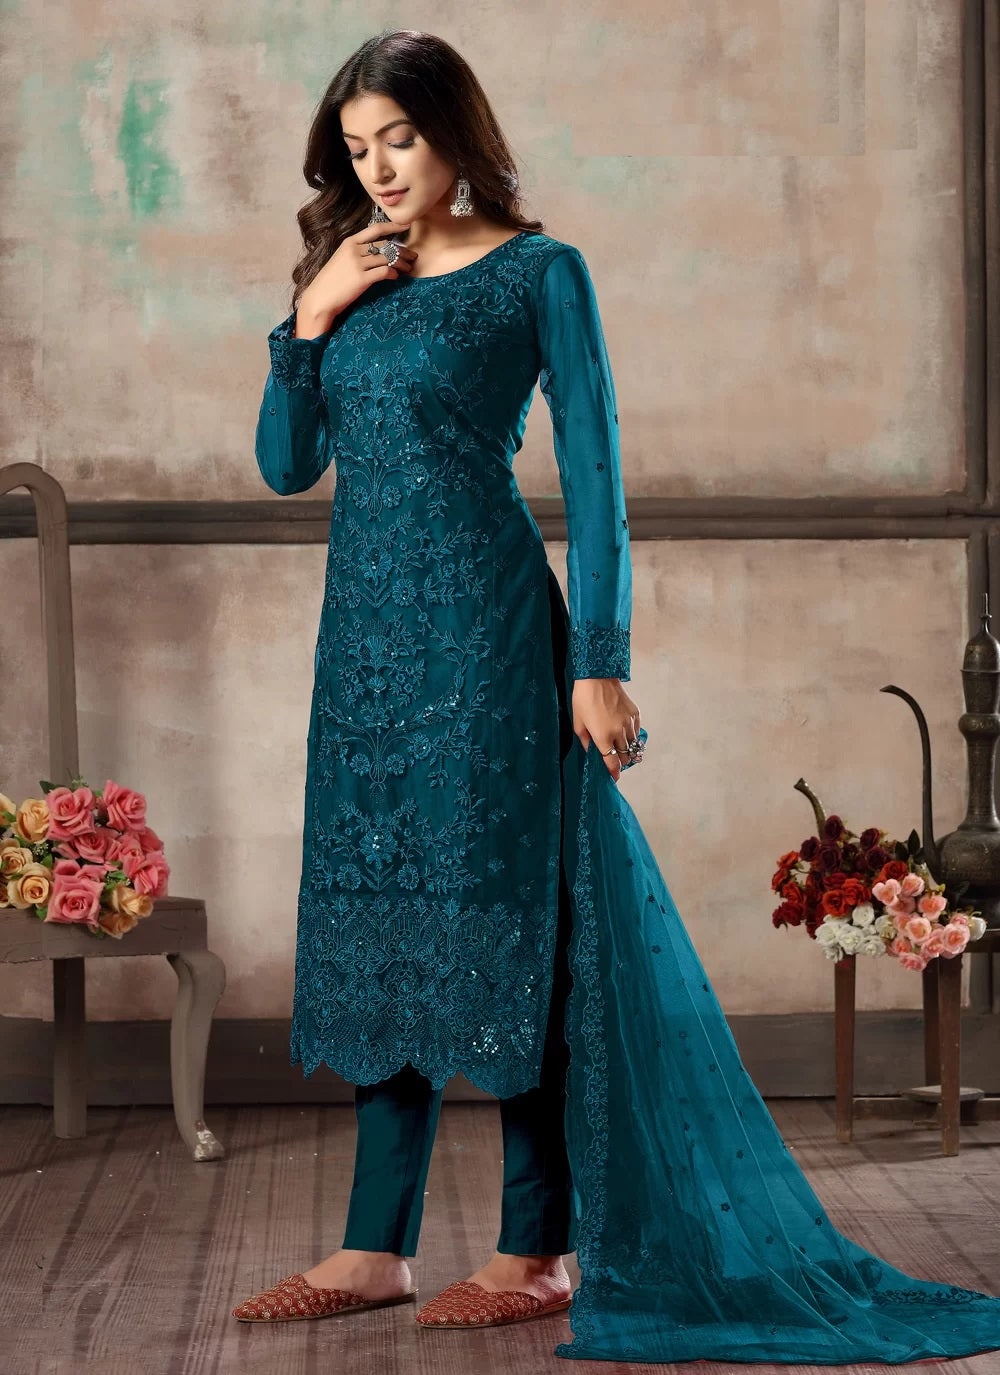 Teal Blue Color Palazzo Suit